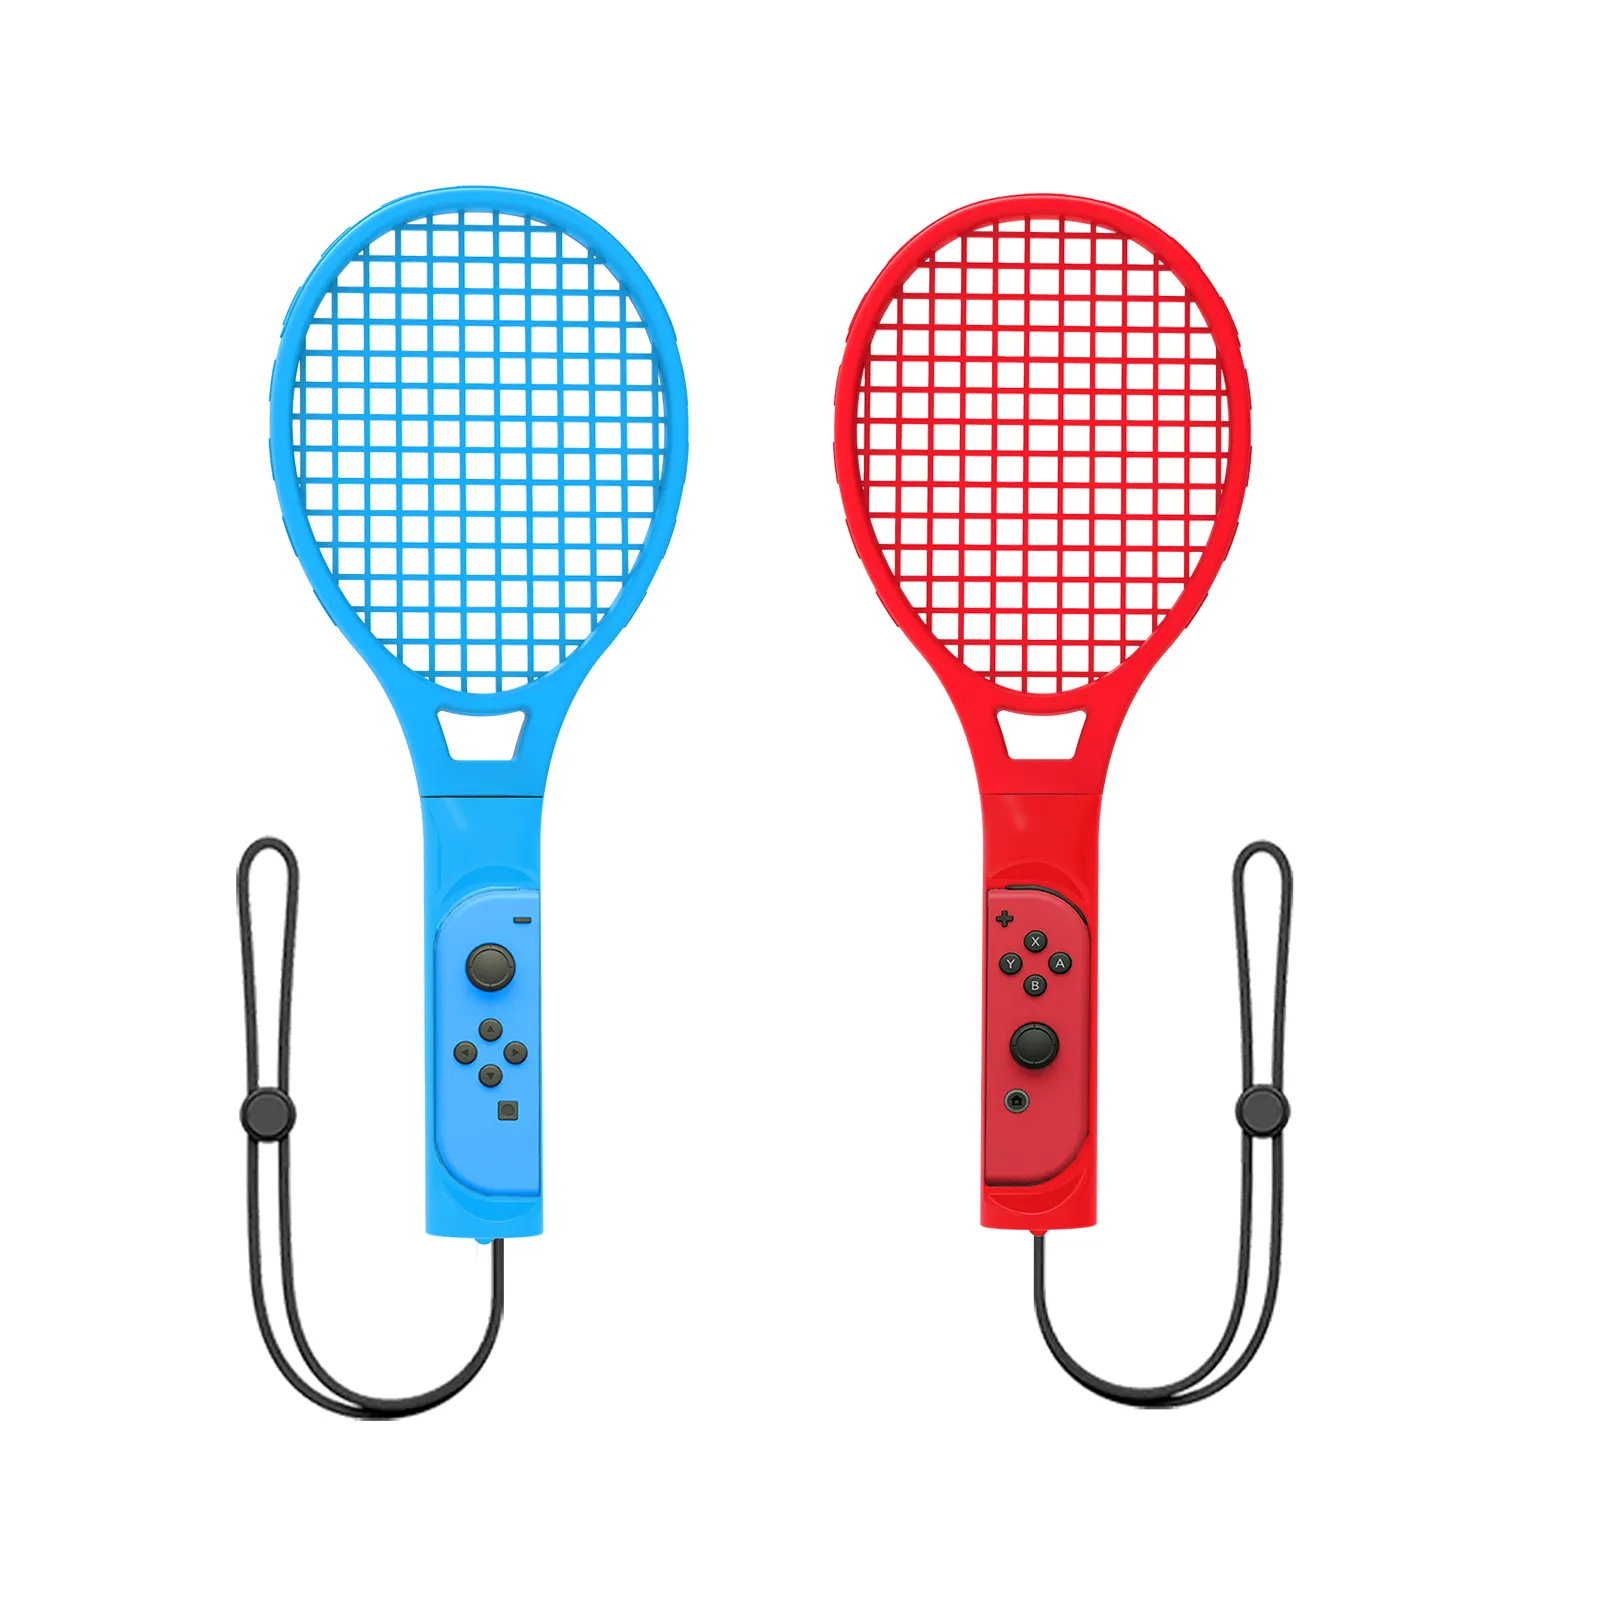 Tennis Racket for Nintendo Switch Joypad Controller, Mario Tennis Aces Accessories, Twin Pack